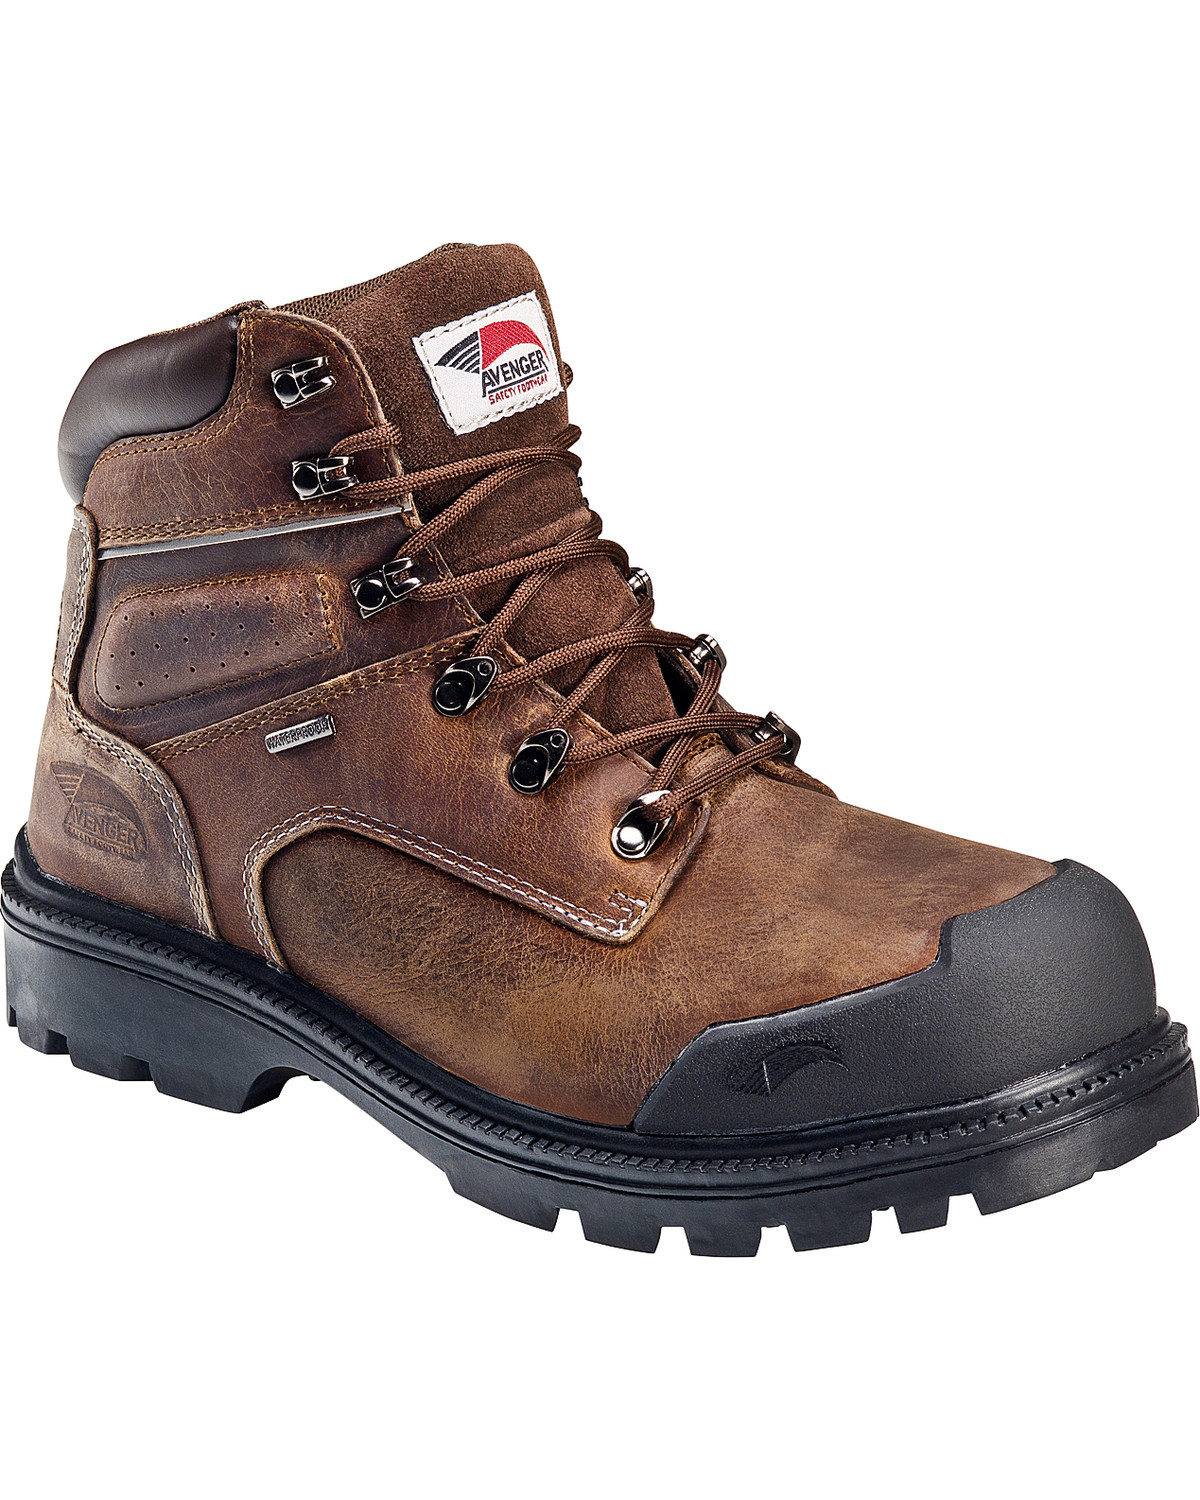 Avenger Men's Steel Toe Puncture and Heat Resistant Lace Up Work Boots